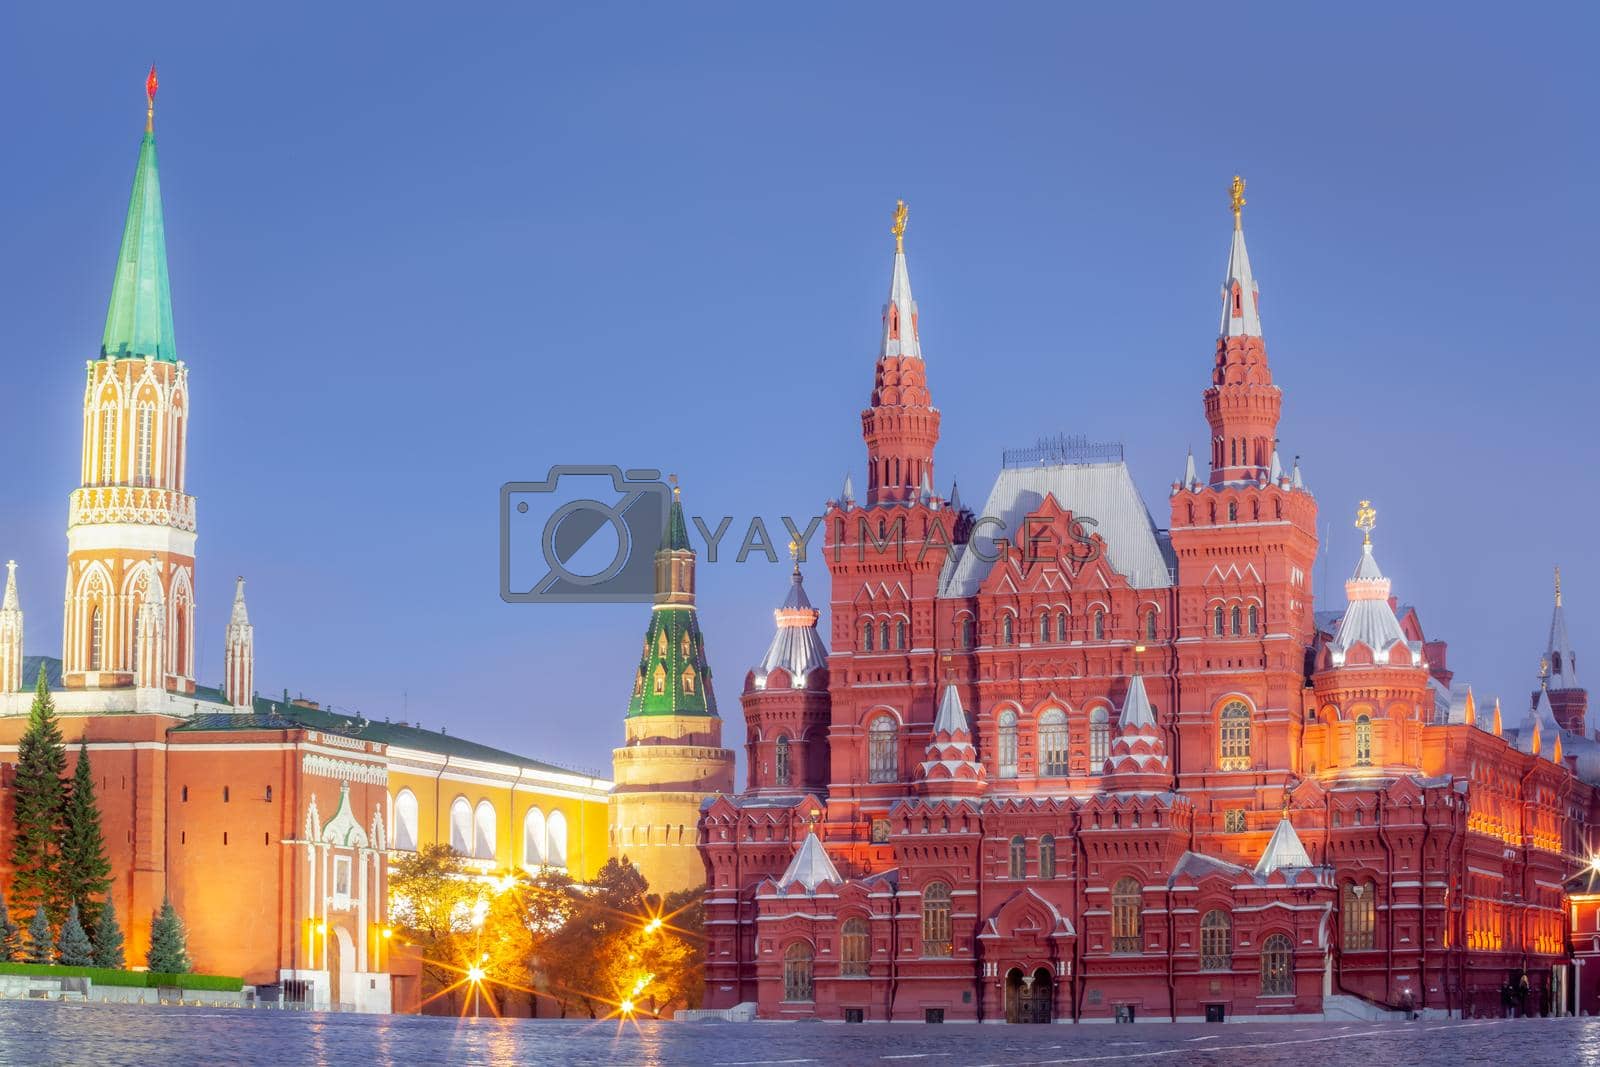 Royalty free image of State historical museum and Kremlin at the Red Square, Moscow by positivetravelart